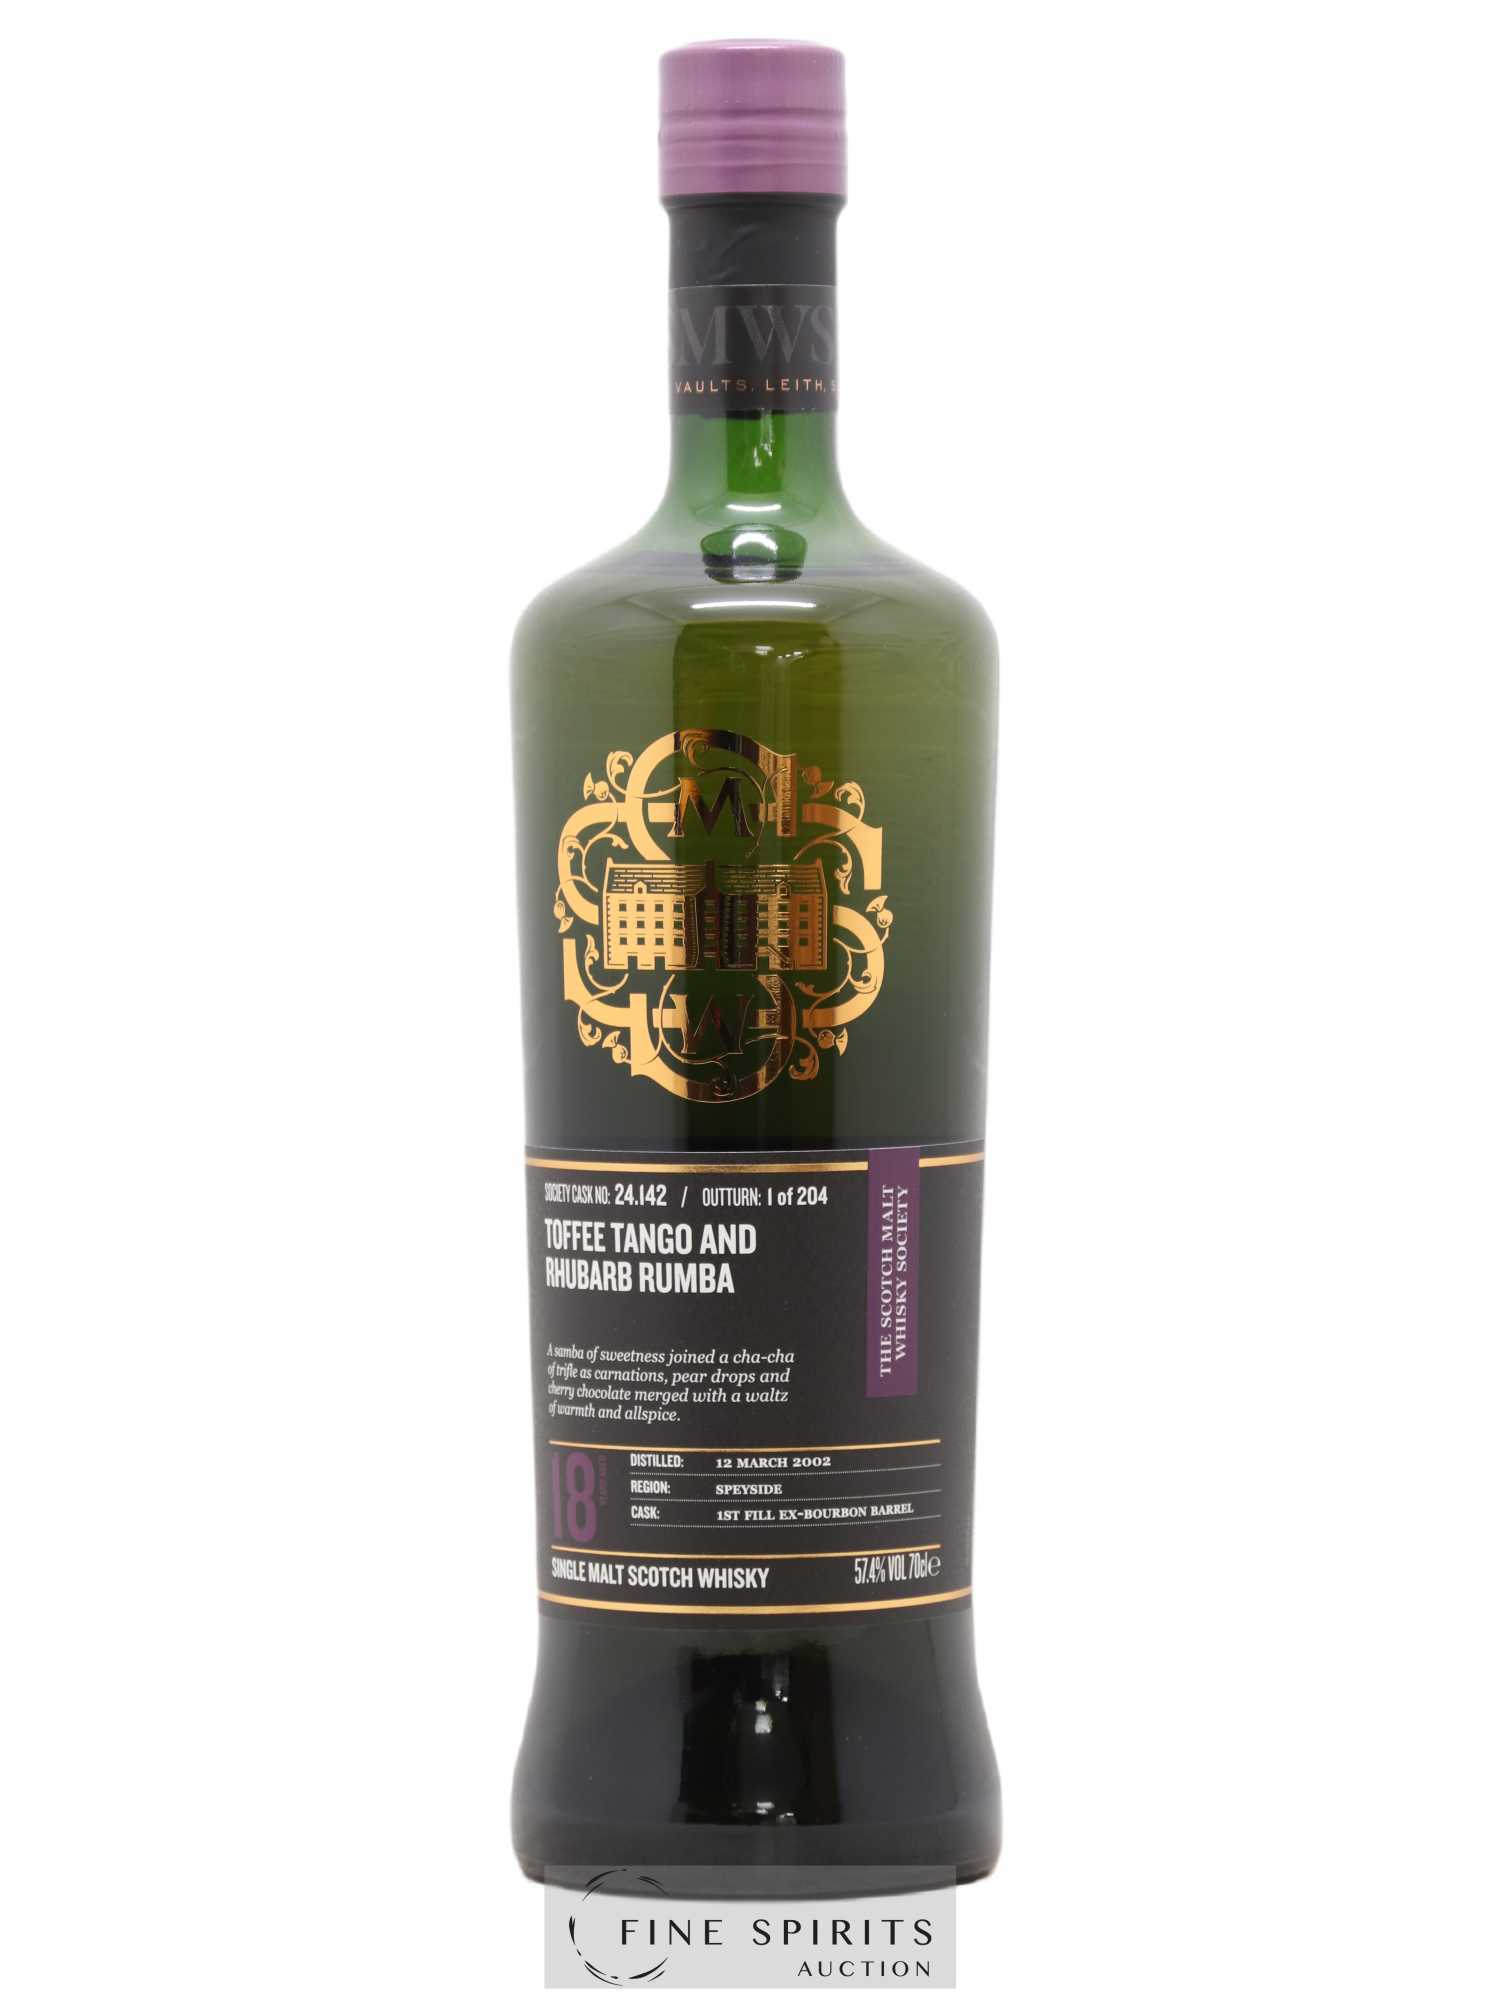 Toffee Tango and Rhubarb Rumba 18 years 2002 The Scotch Malt Whisky Society Cask n°24.142 - One of 204